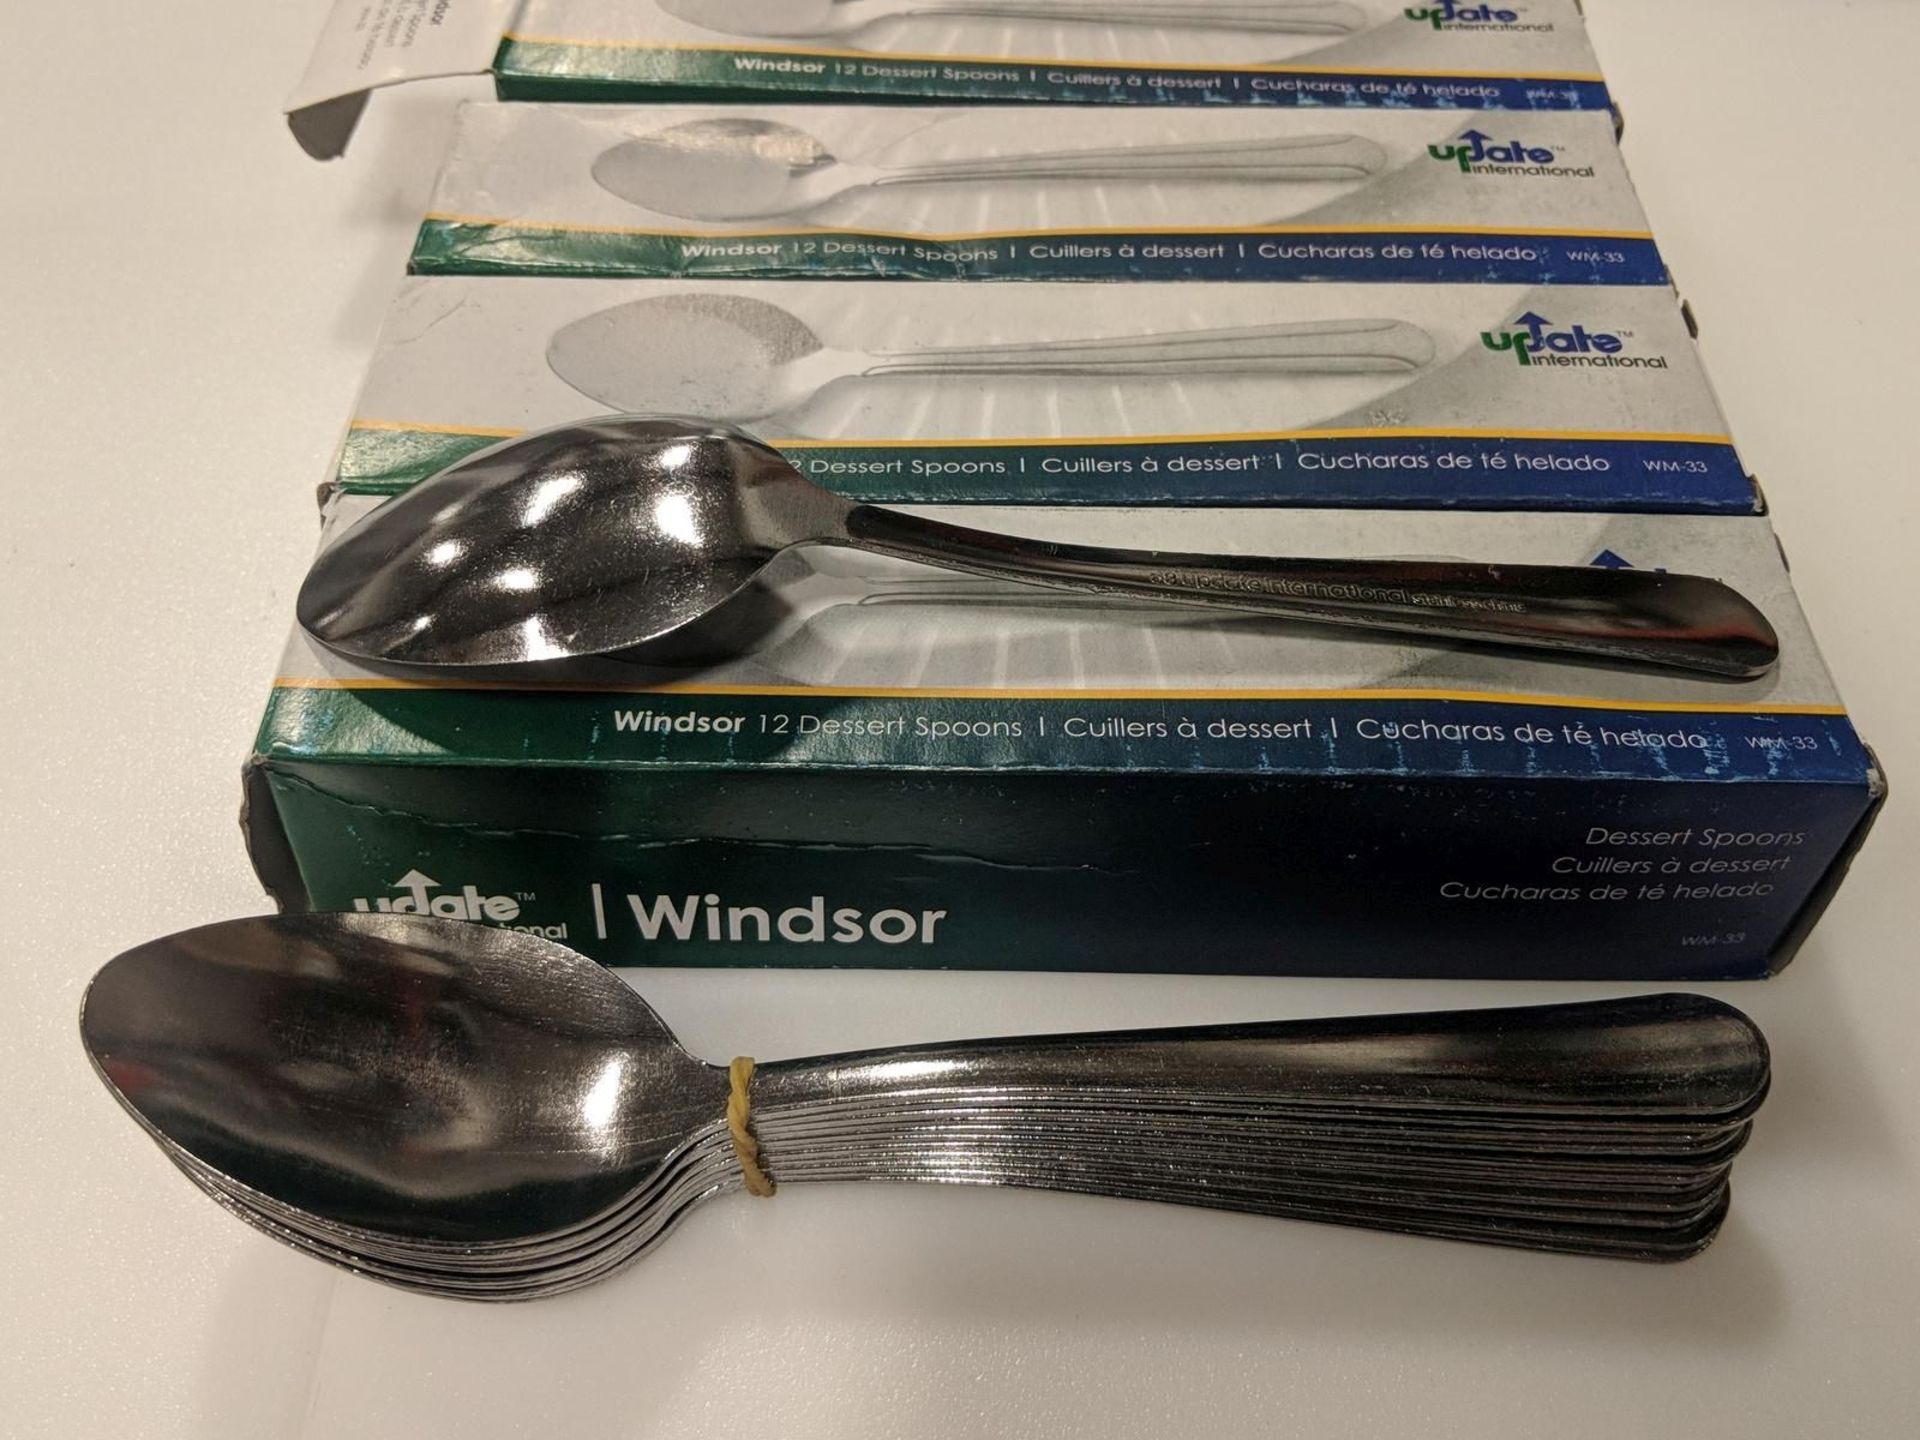 Stainless Dessert Spoons, Windsor Series - Lot of 48